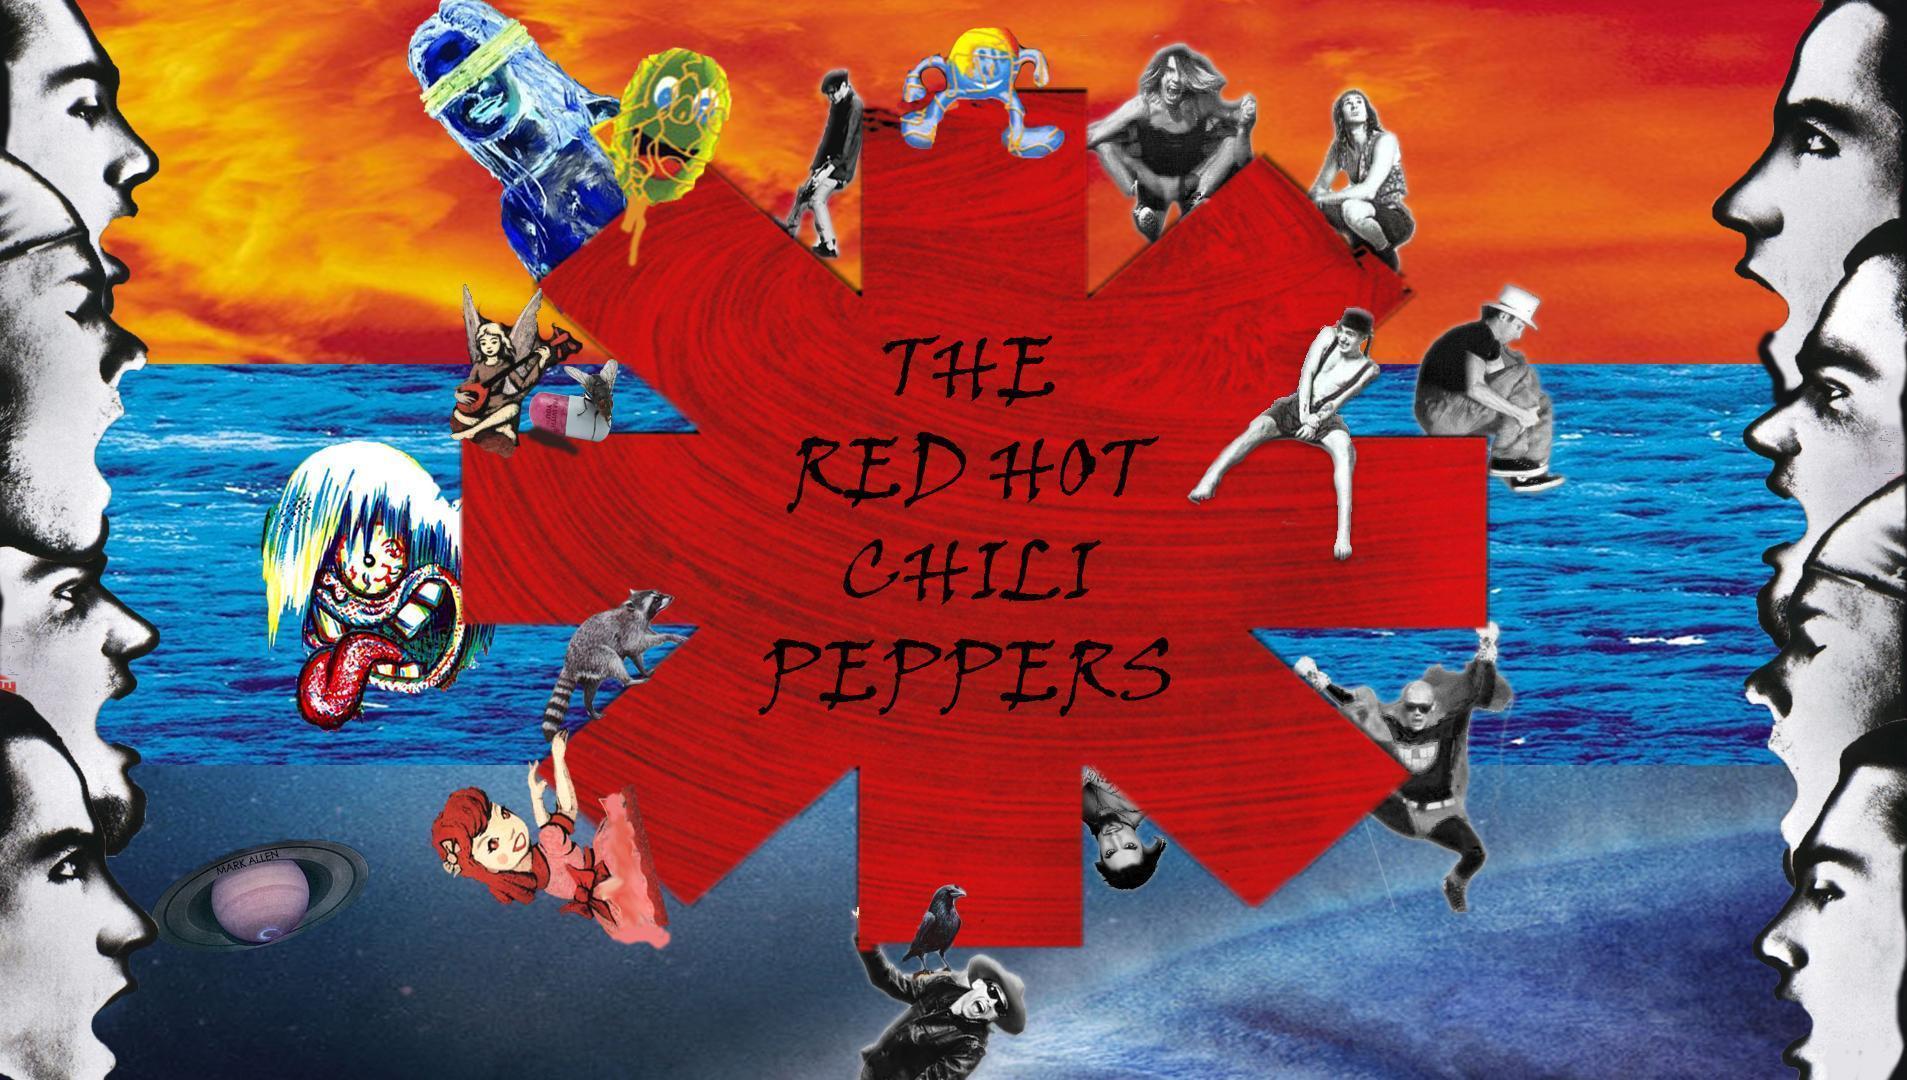 RHCP Wallpaper Member Every Album Cover In One Pic!almost